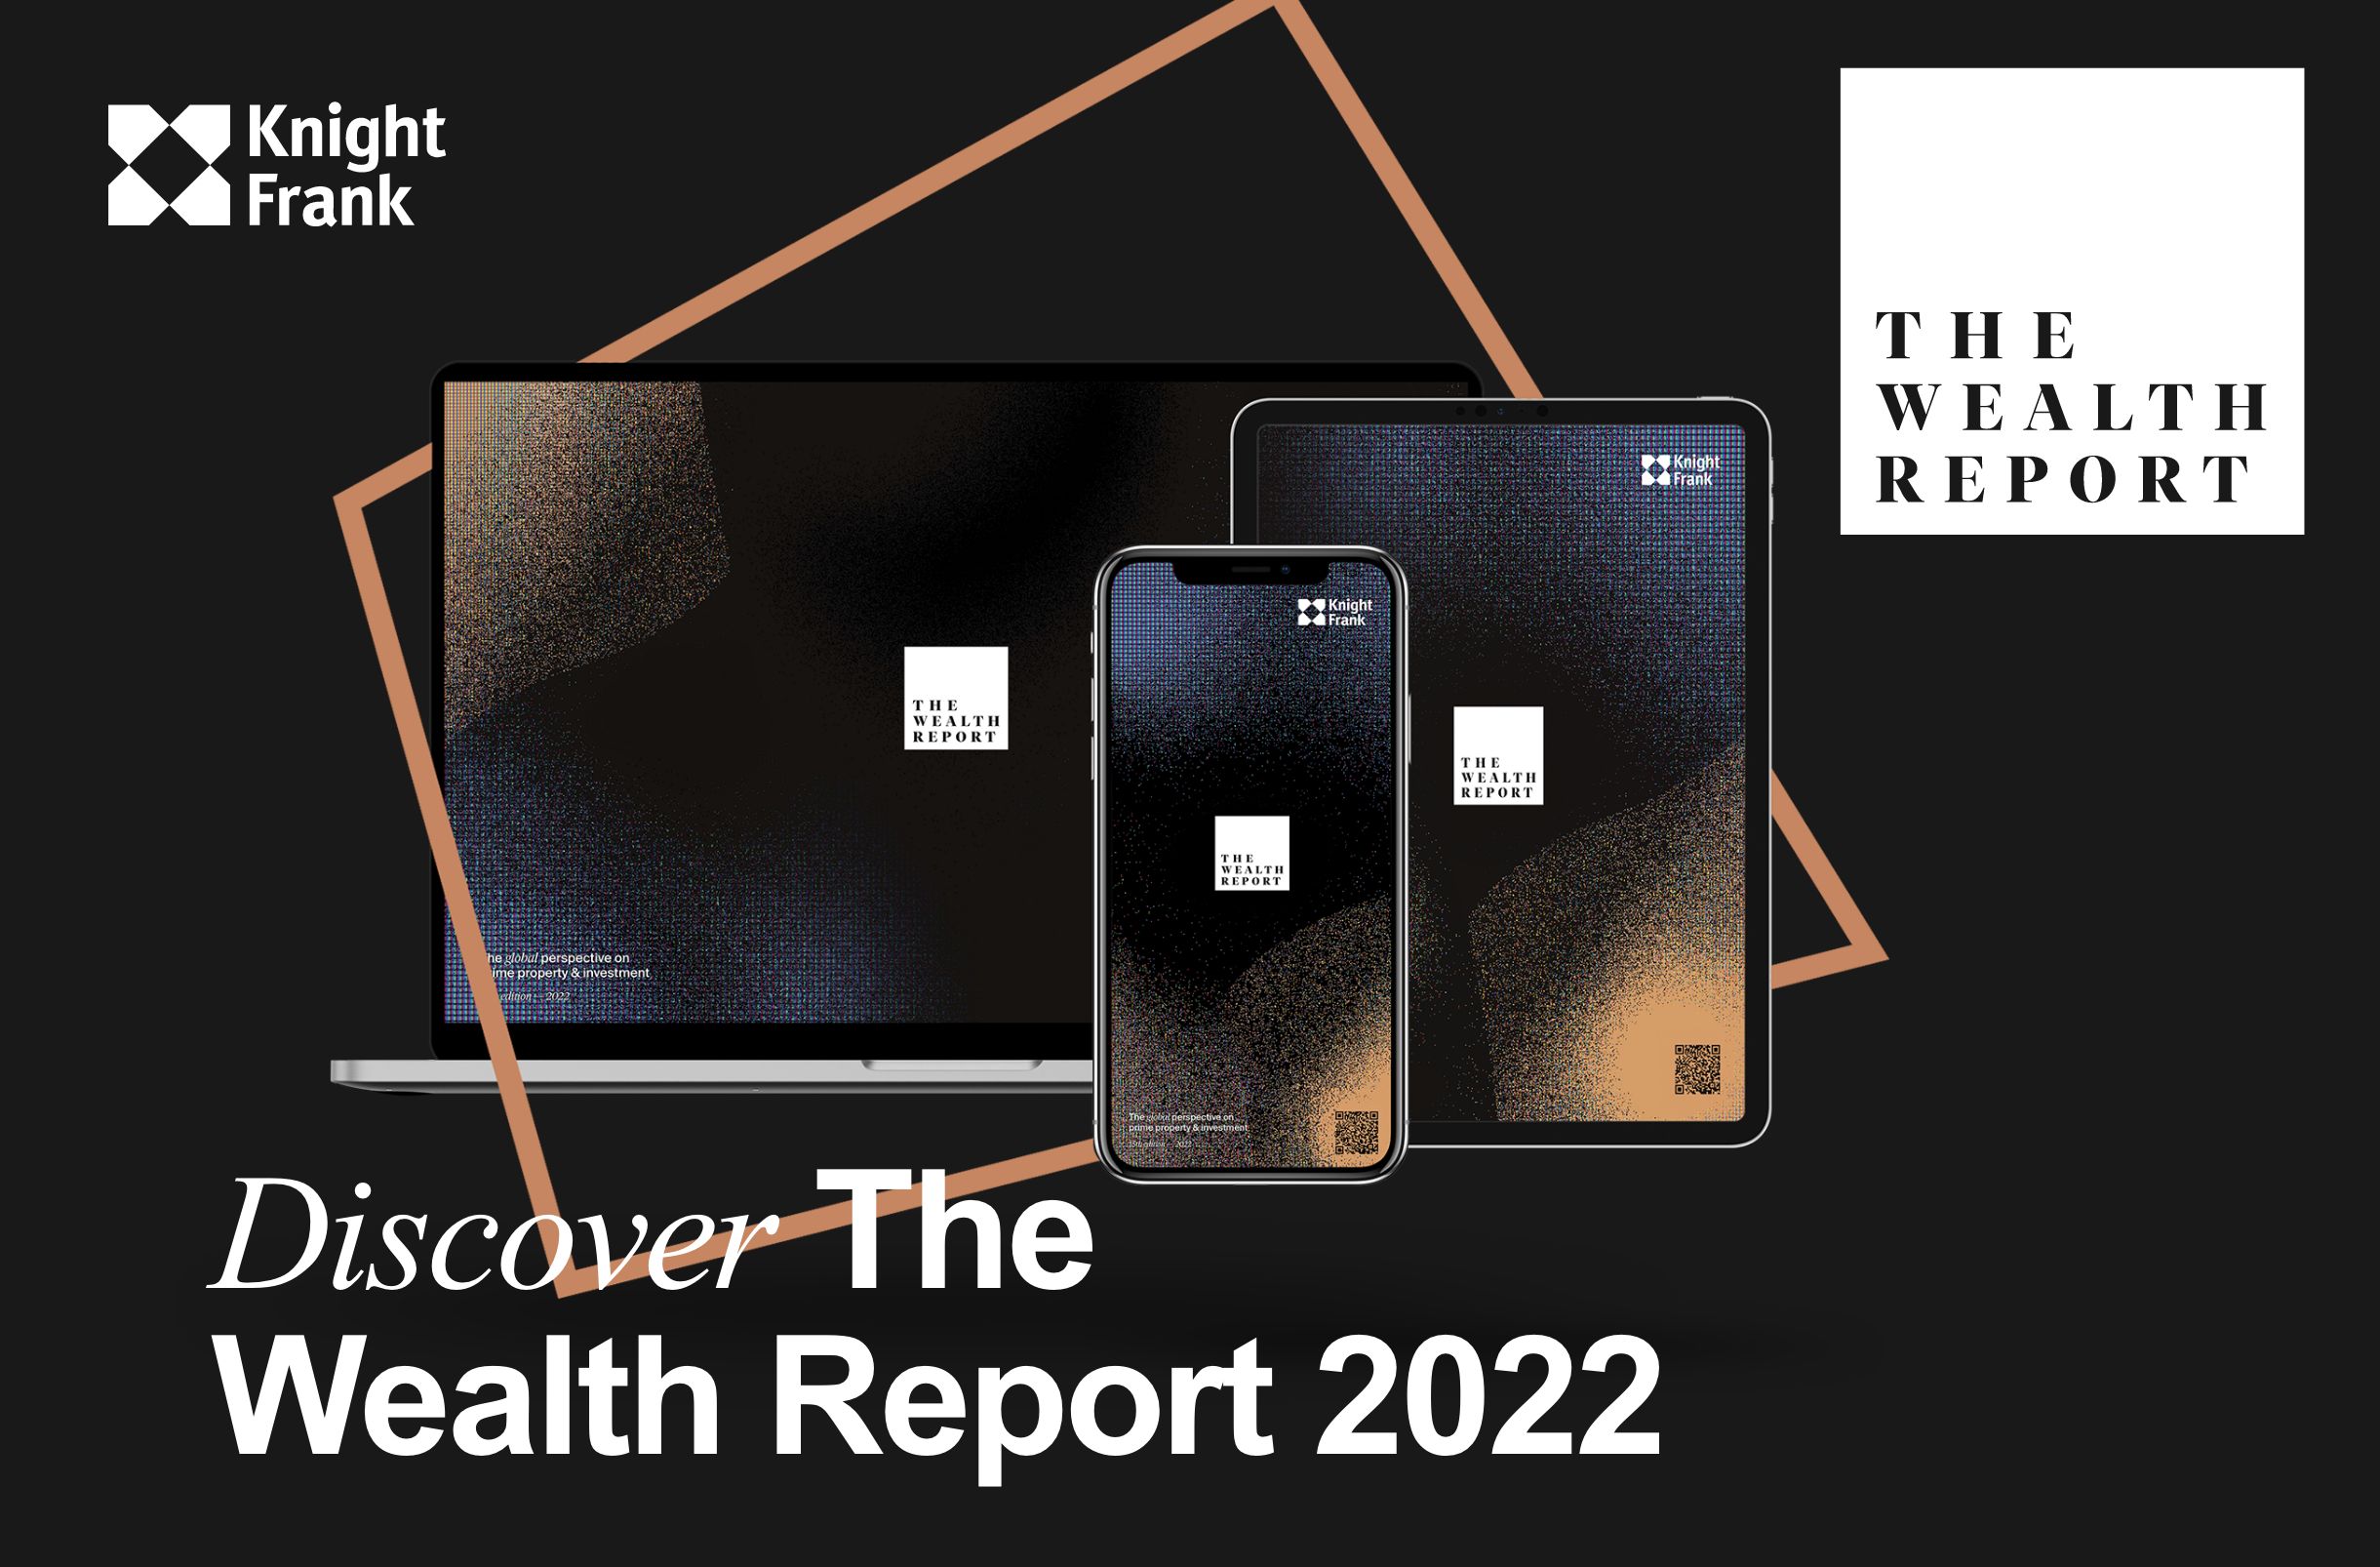 Knight Frank - Descubre The Wealth Report 2022